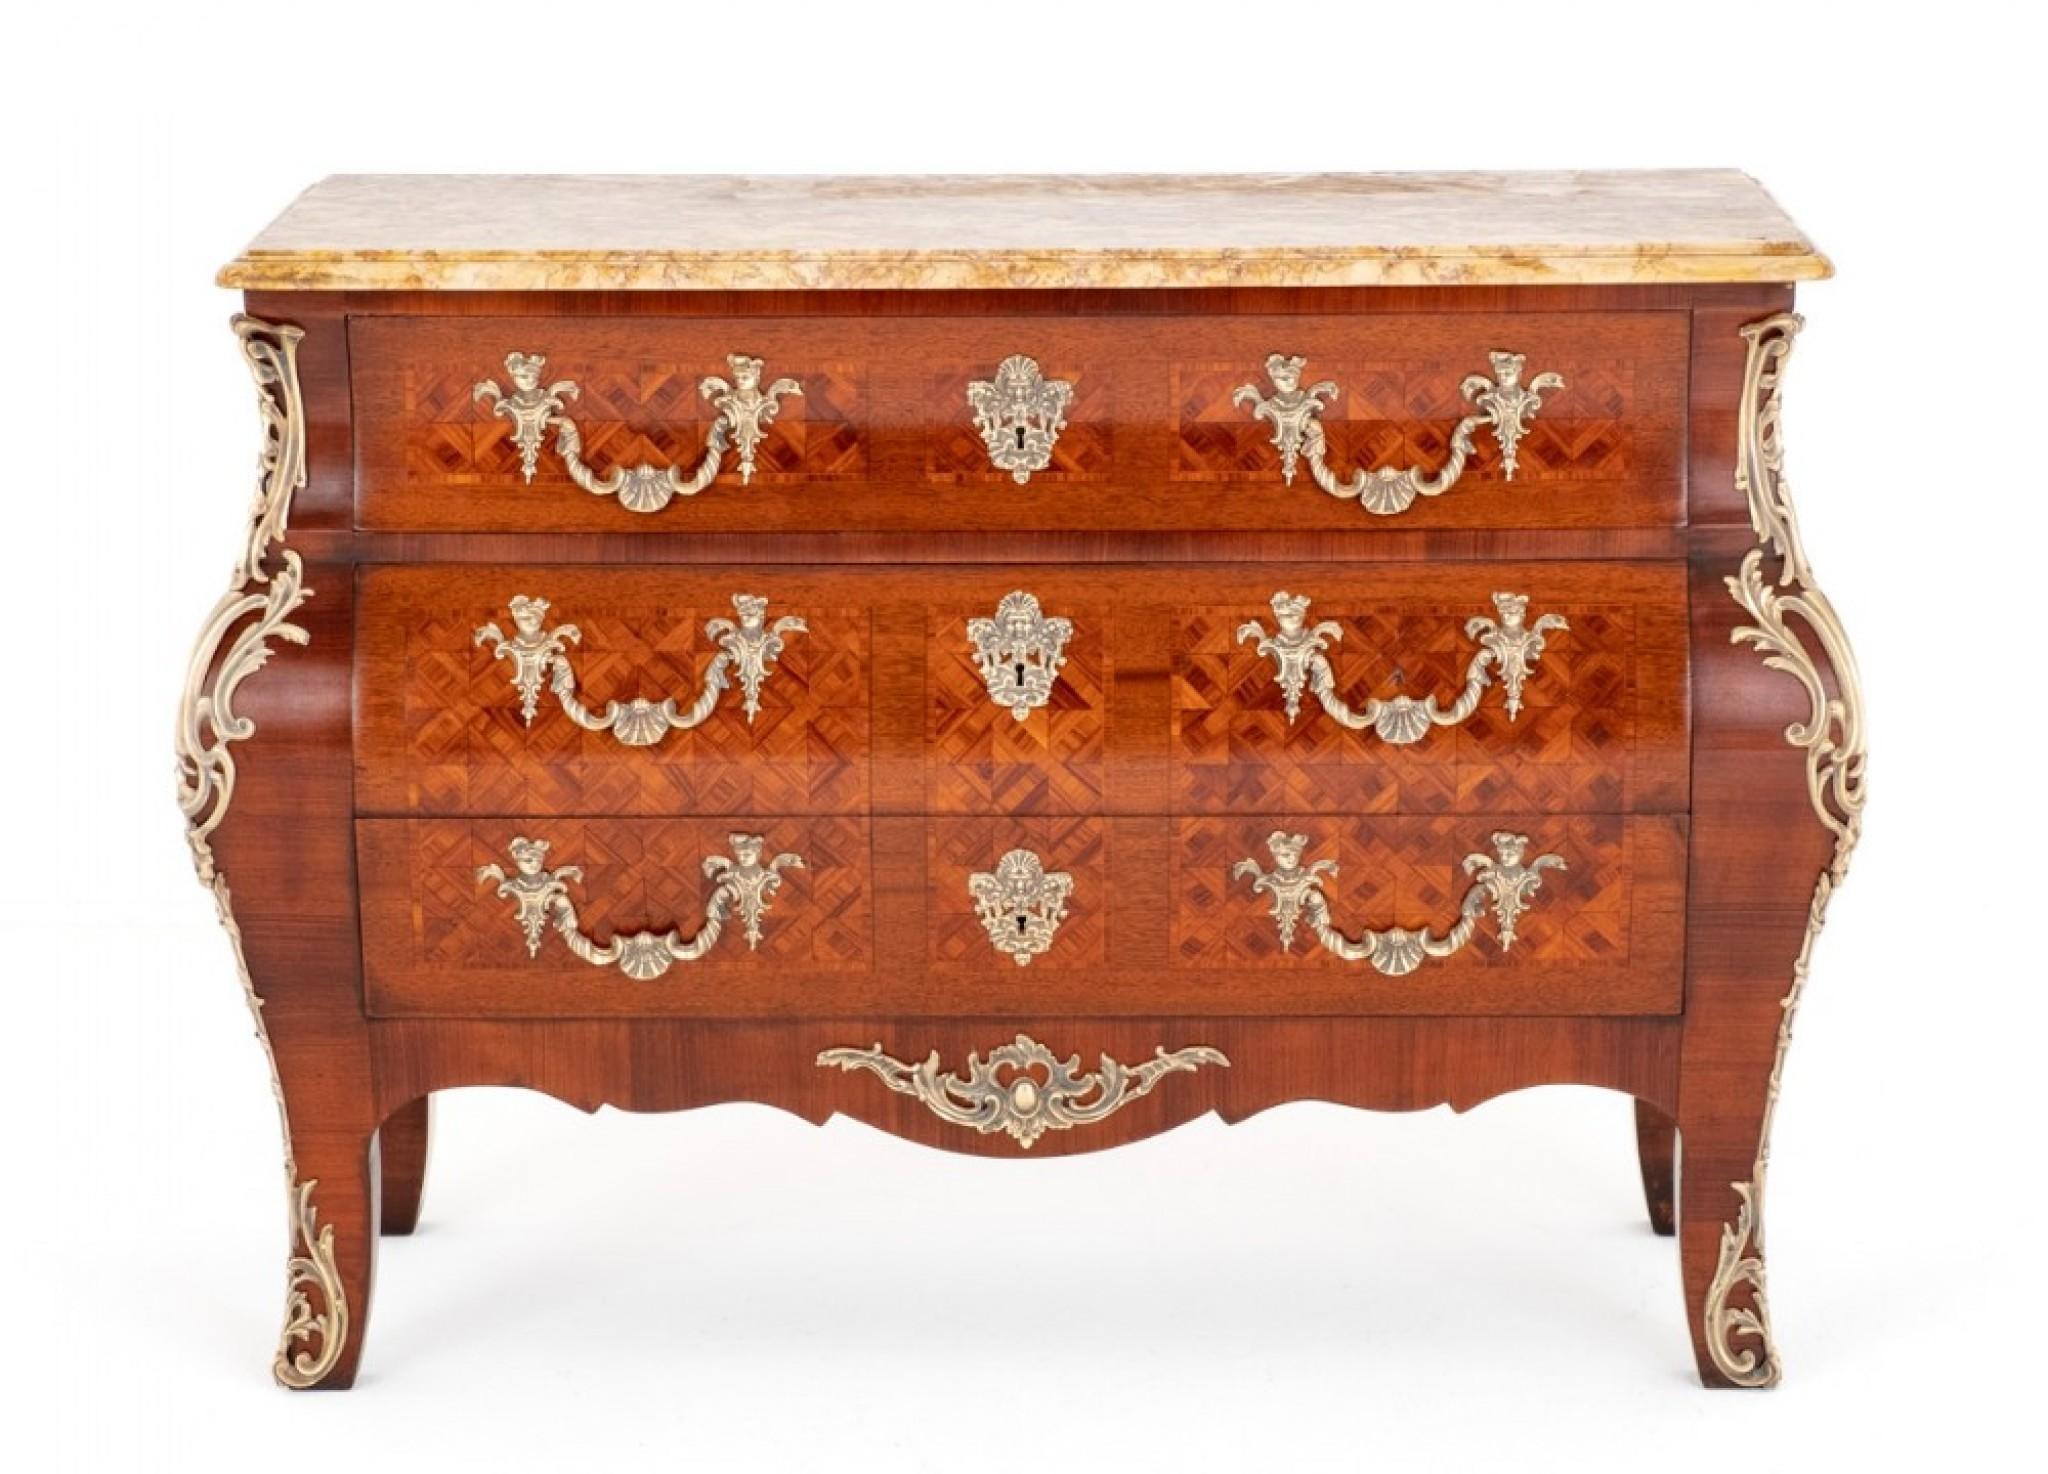 Impressive Louis XVI Style Commode.
Circa 1900
Combining the bombe shape with Louis XVI style elements creates a unique juxtaposition of curves and classical details. The result is a piece of furniture that exudes elegance and sophistication while